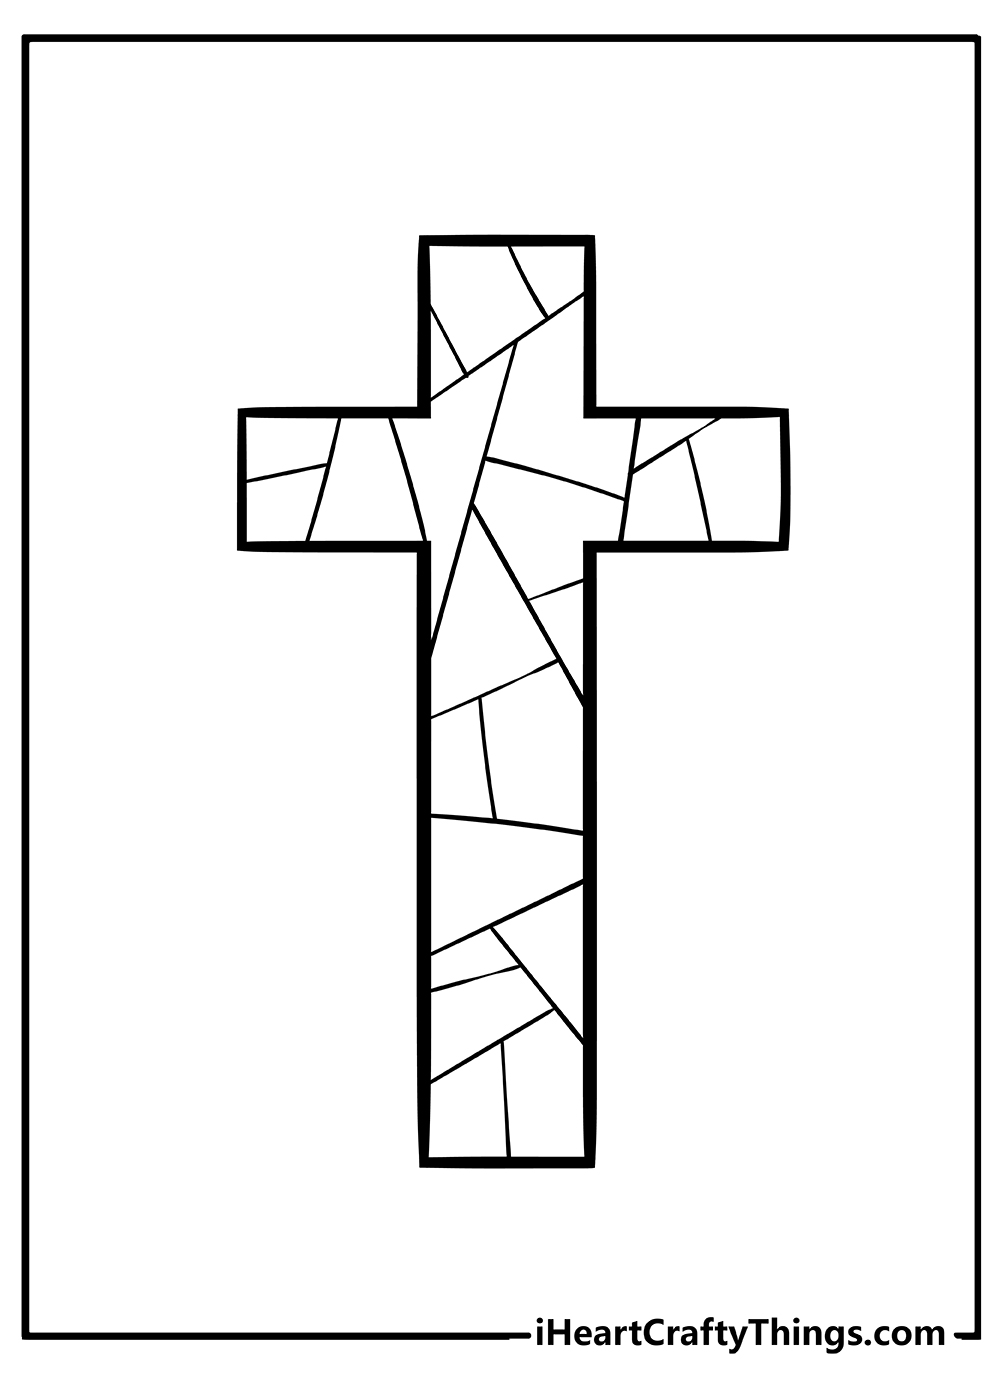 Cross Coloring Pages for kids free download